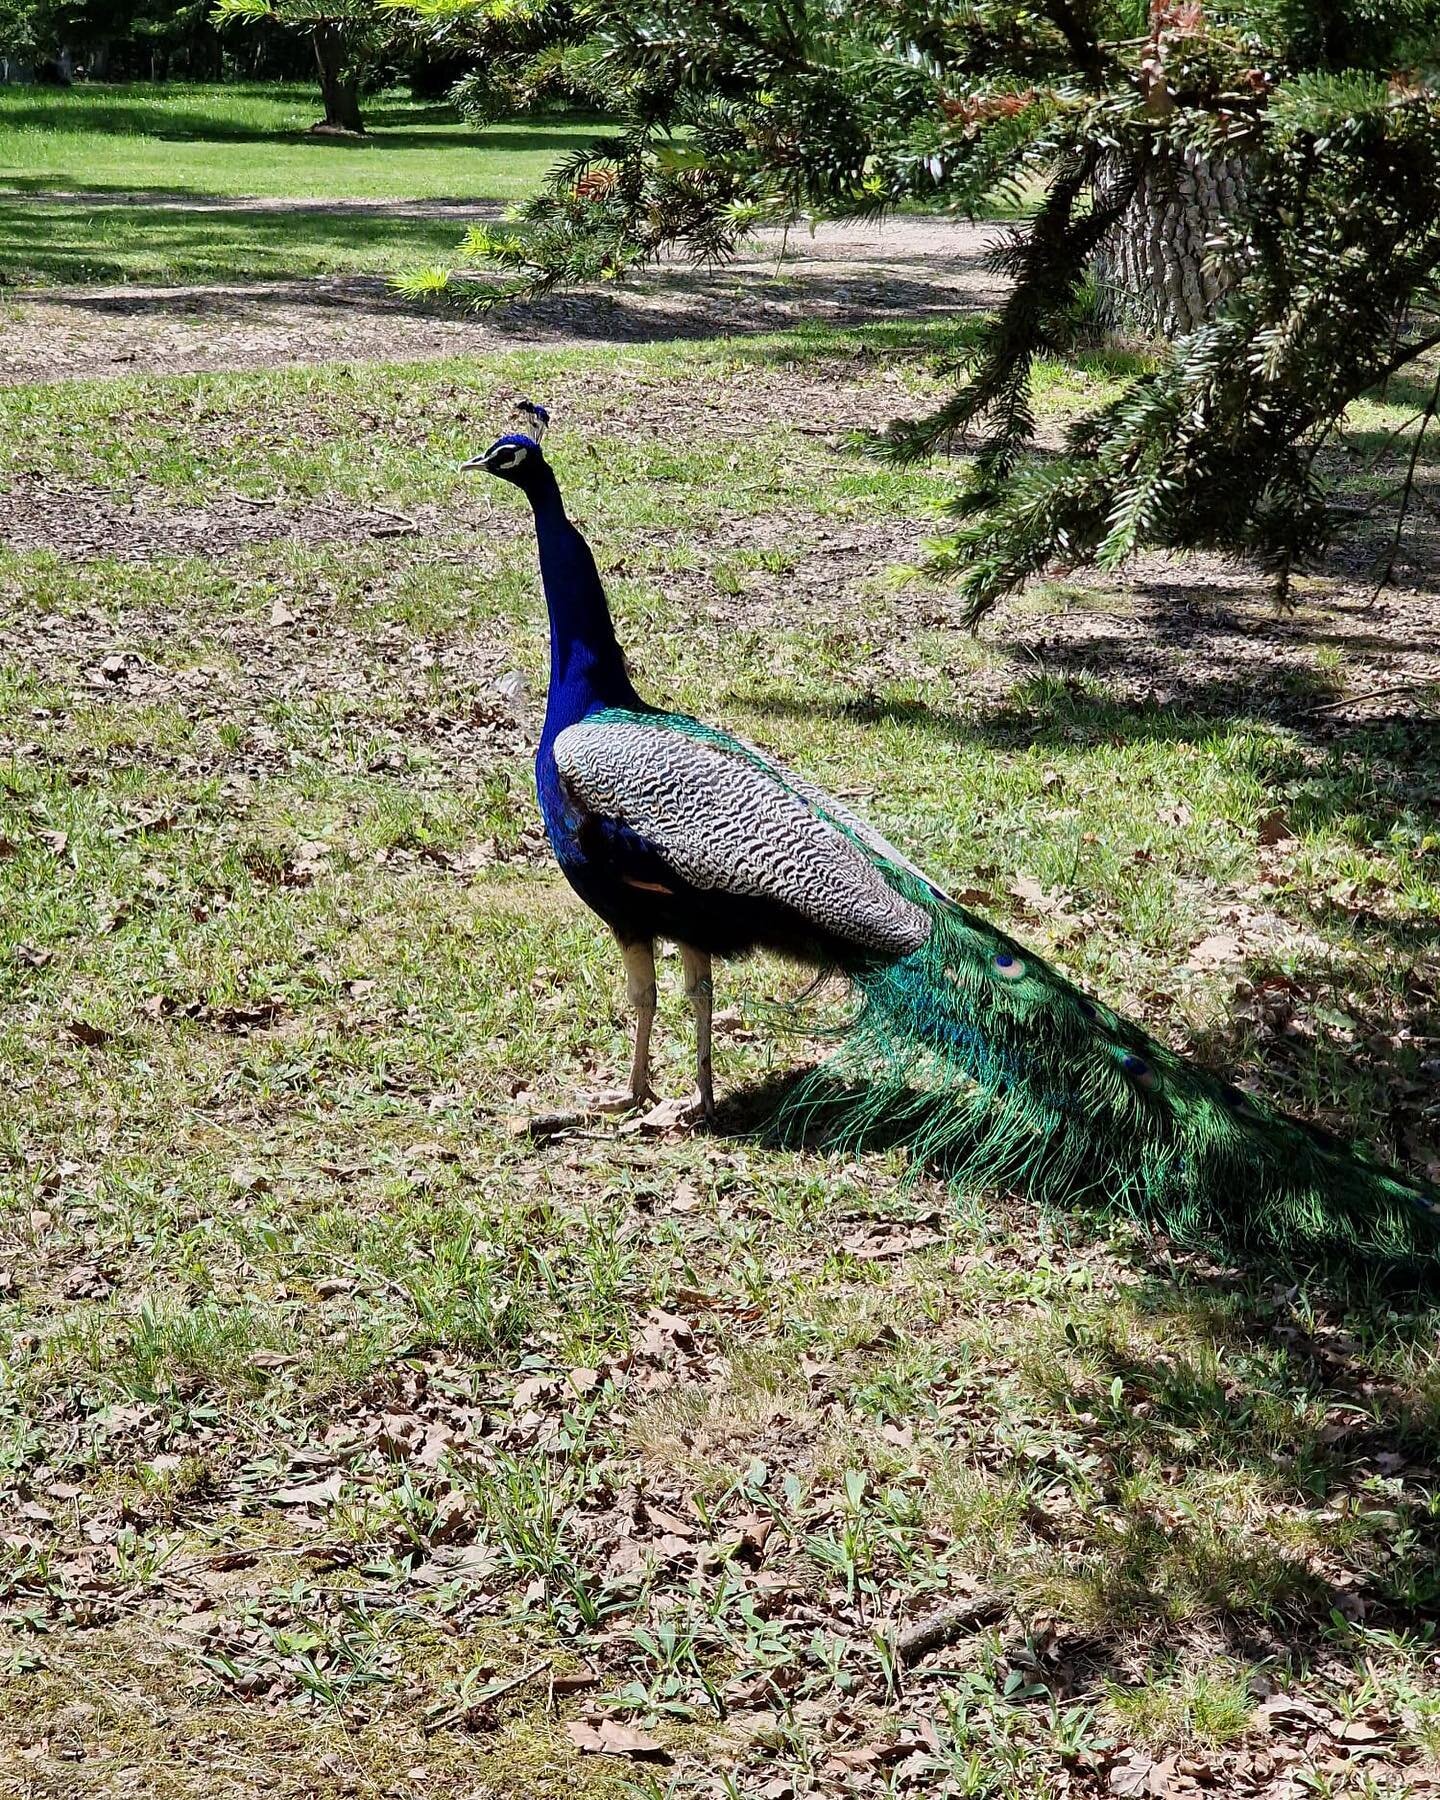 Exotic wildlife in our area 🦚